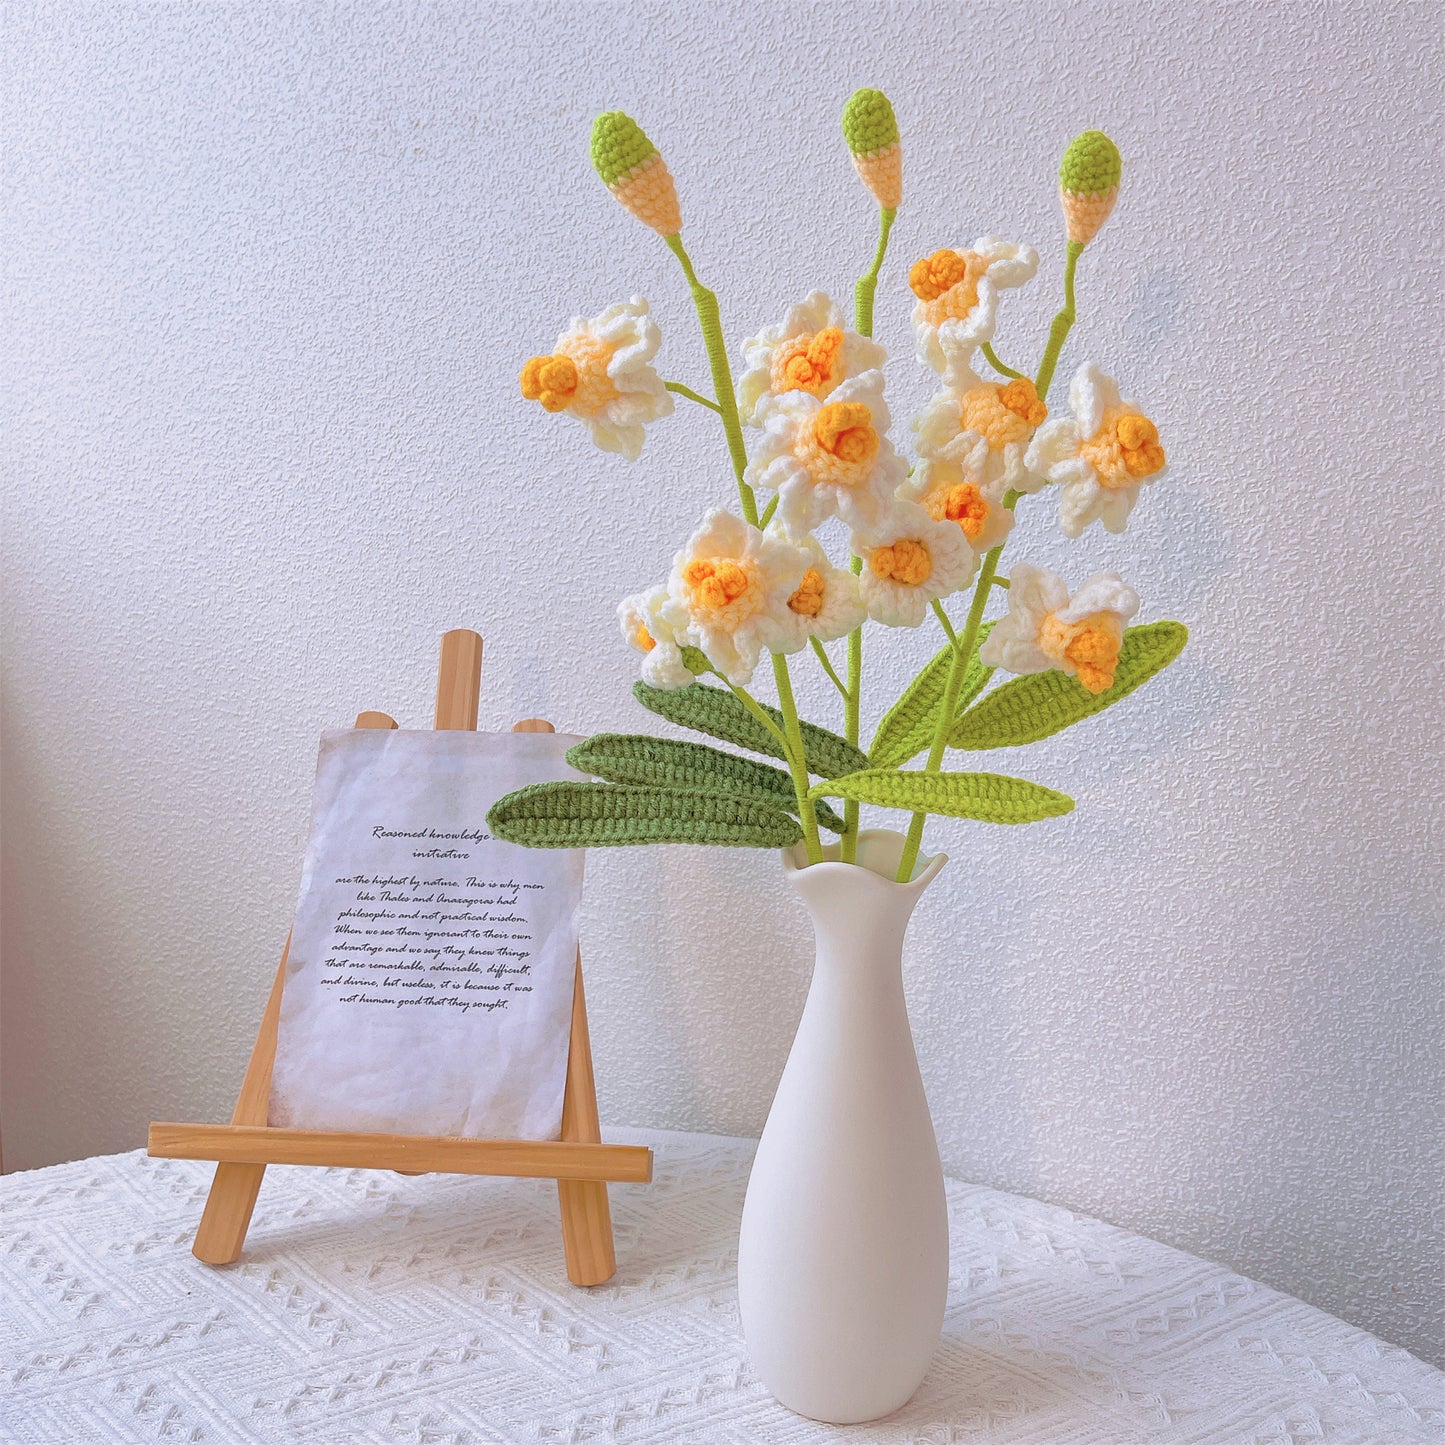 Spring Awakening: Handcrafted Crochet Daffodils Stake for a Cheerful Garden Decor